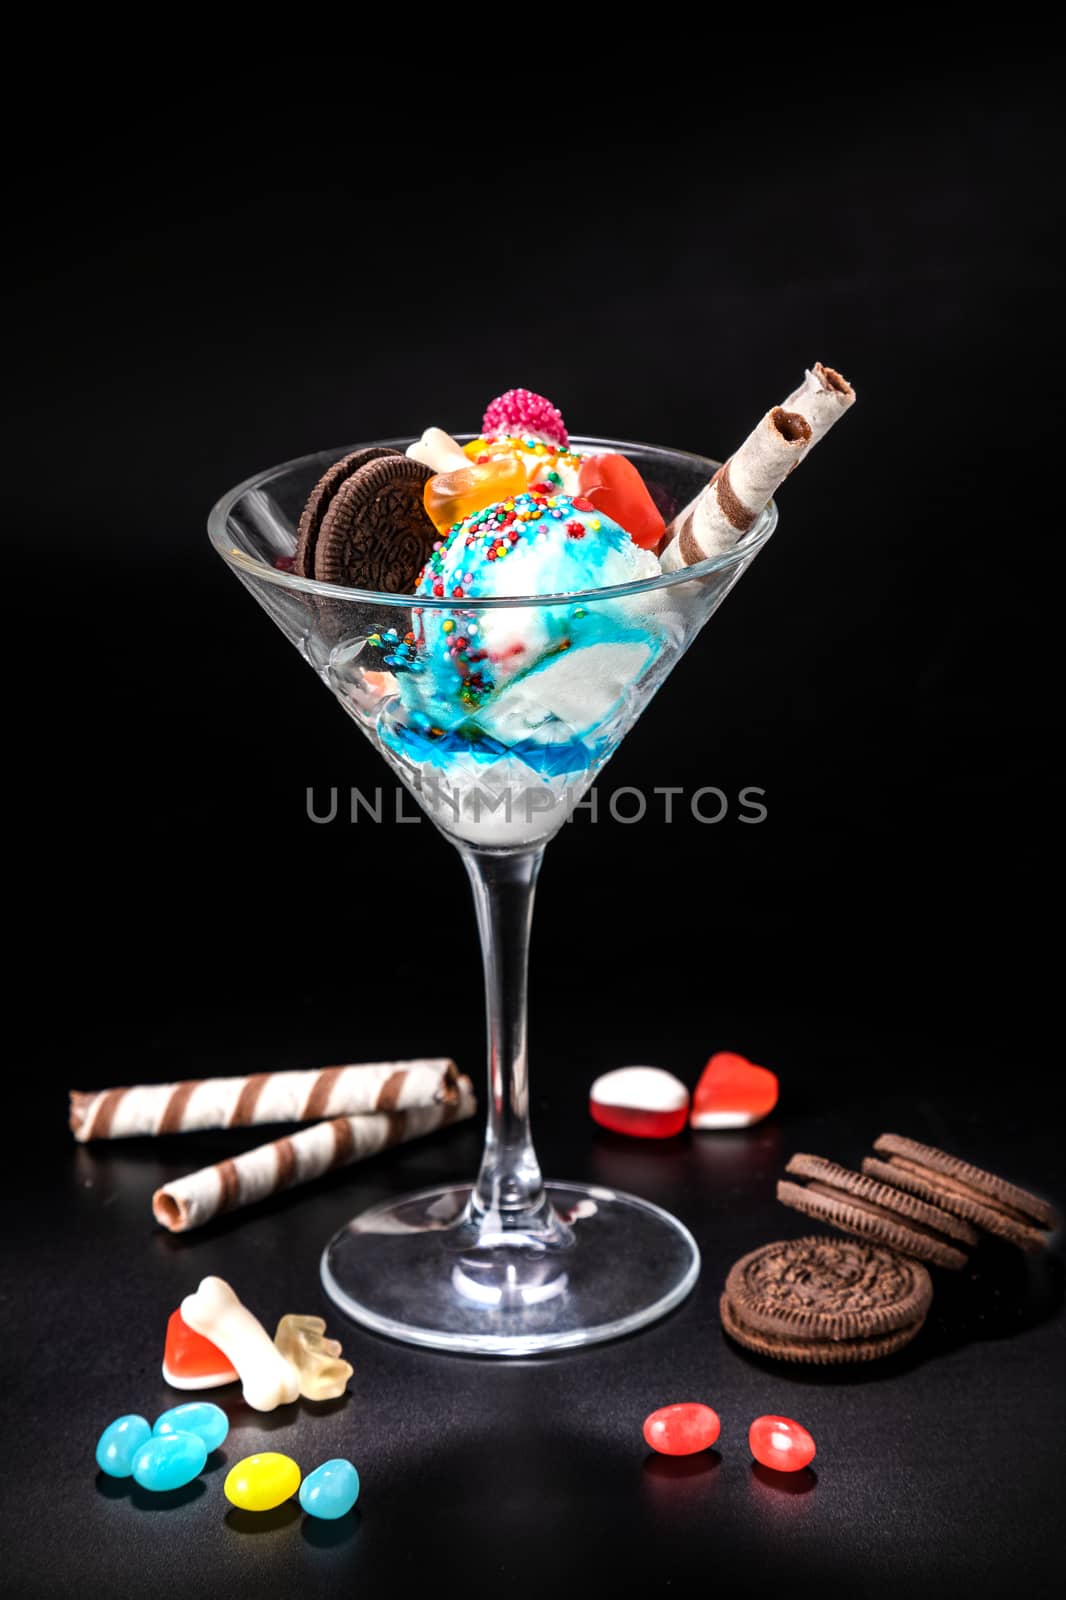 Ice cream balls in a glass with decoration by sveter